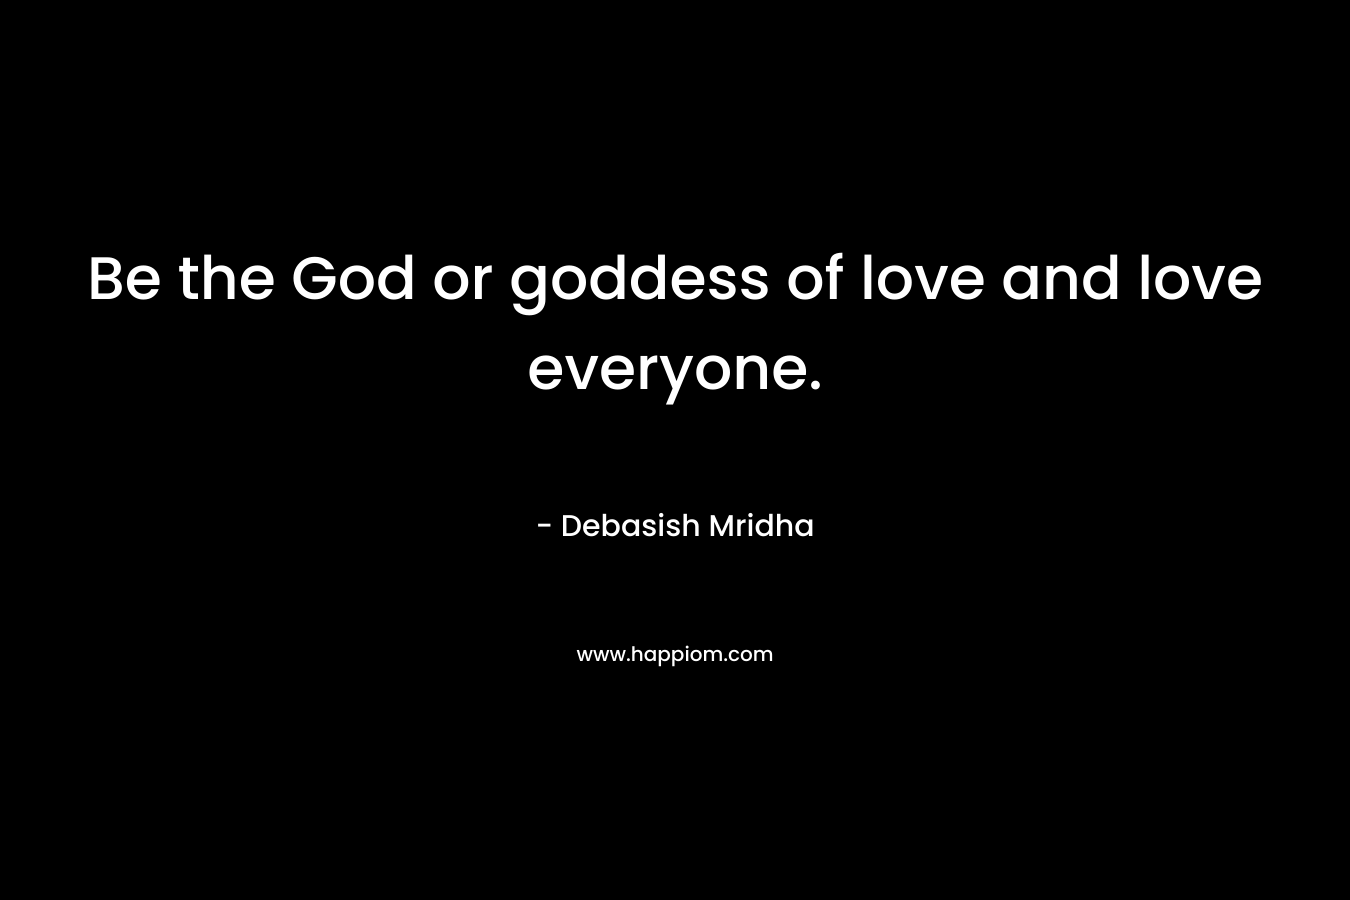 Be the God or goddess of love and love everyone.